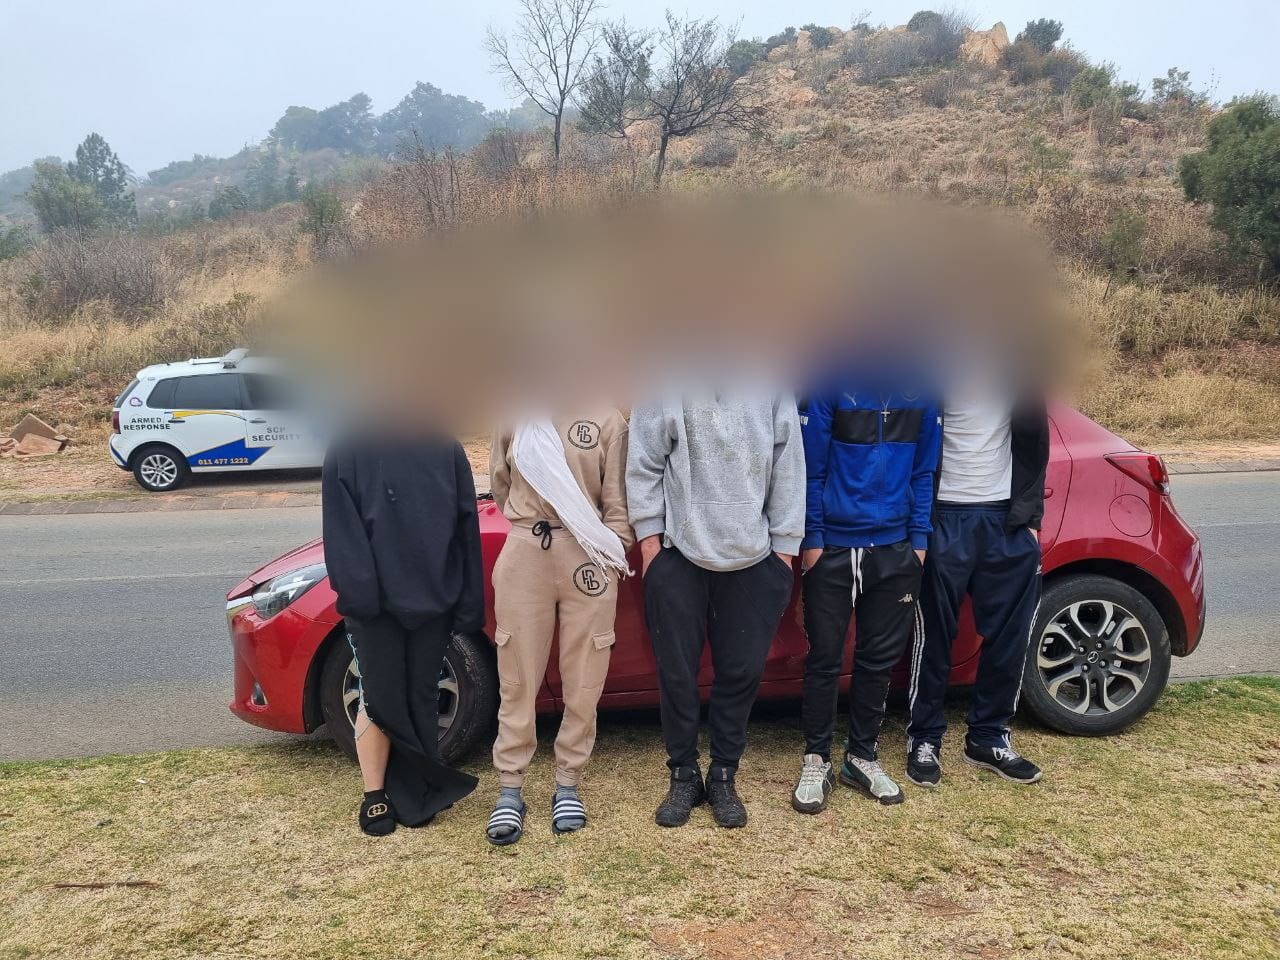 Five suspects were arrested after several fraud cases and theft was opened against them in various areas around Gauteng